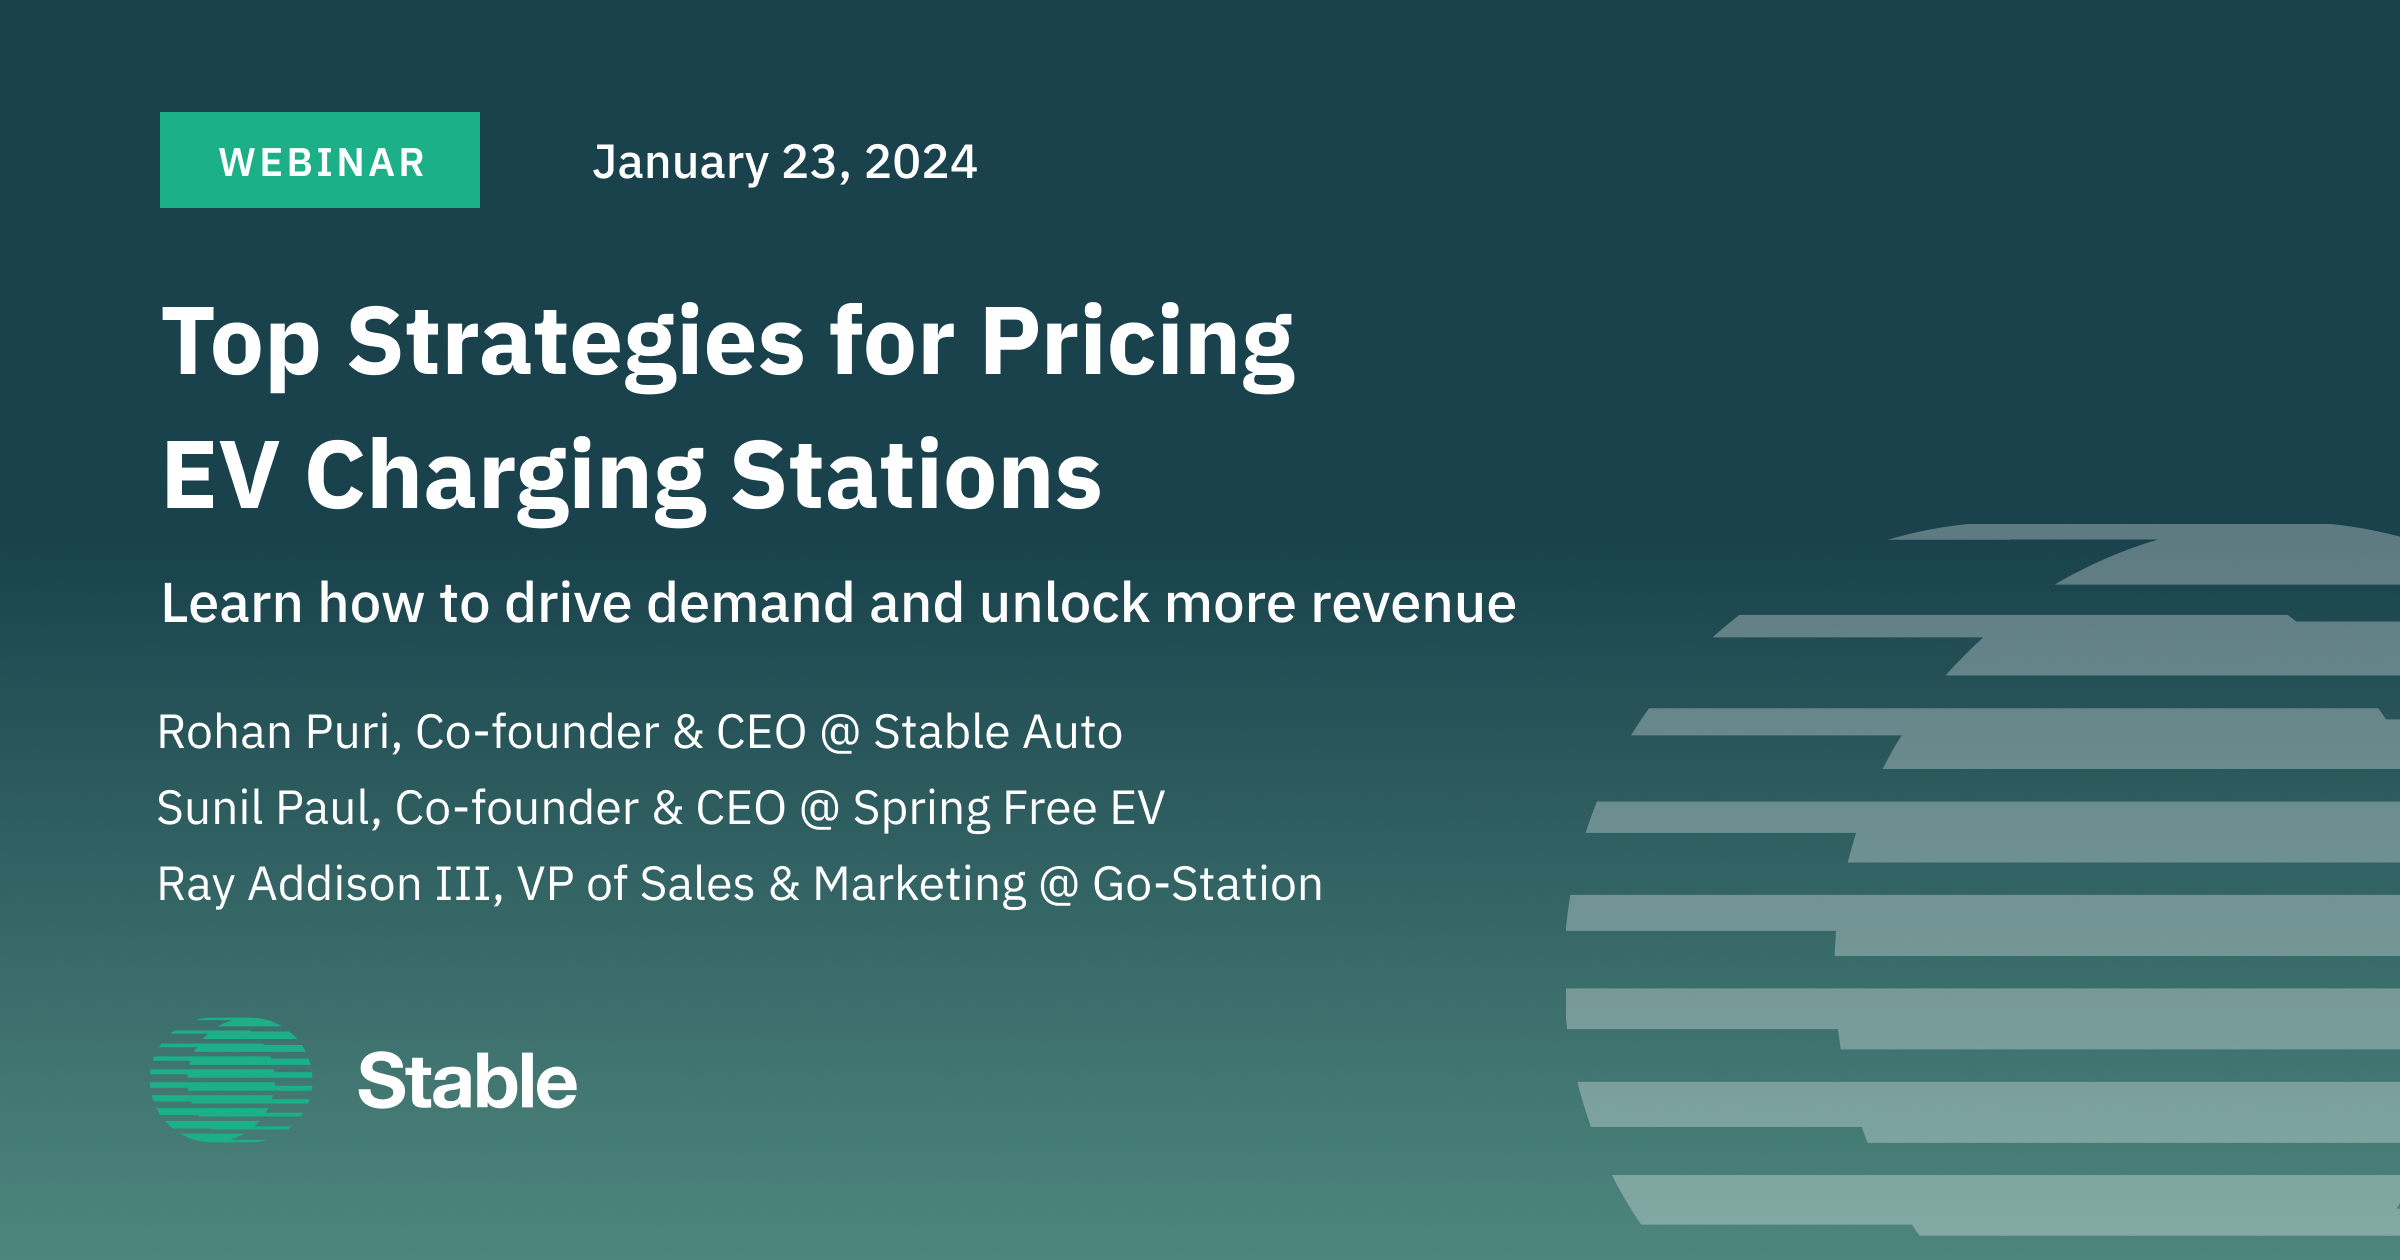 Top Strategies for Pricing EV Charging Stations